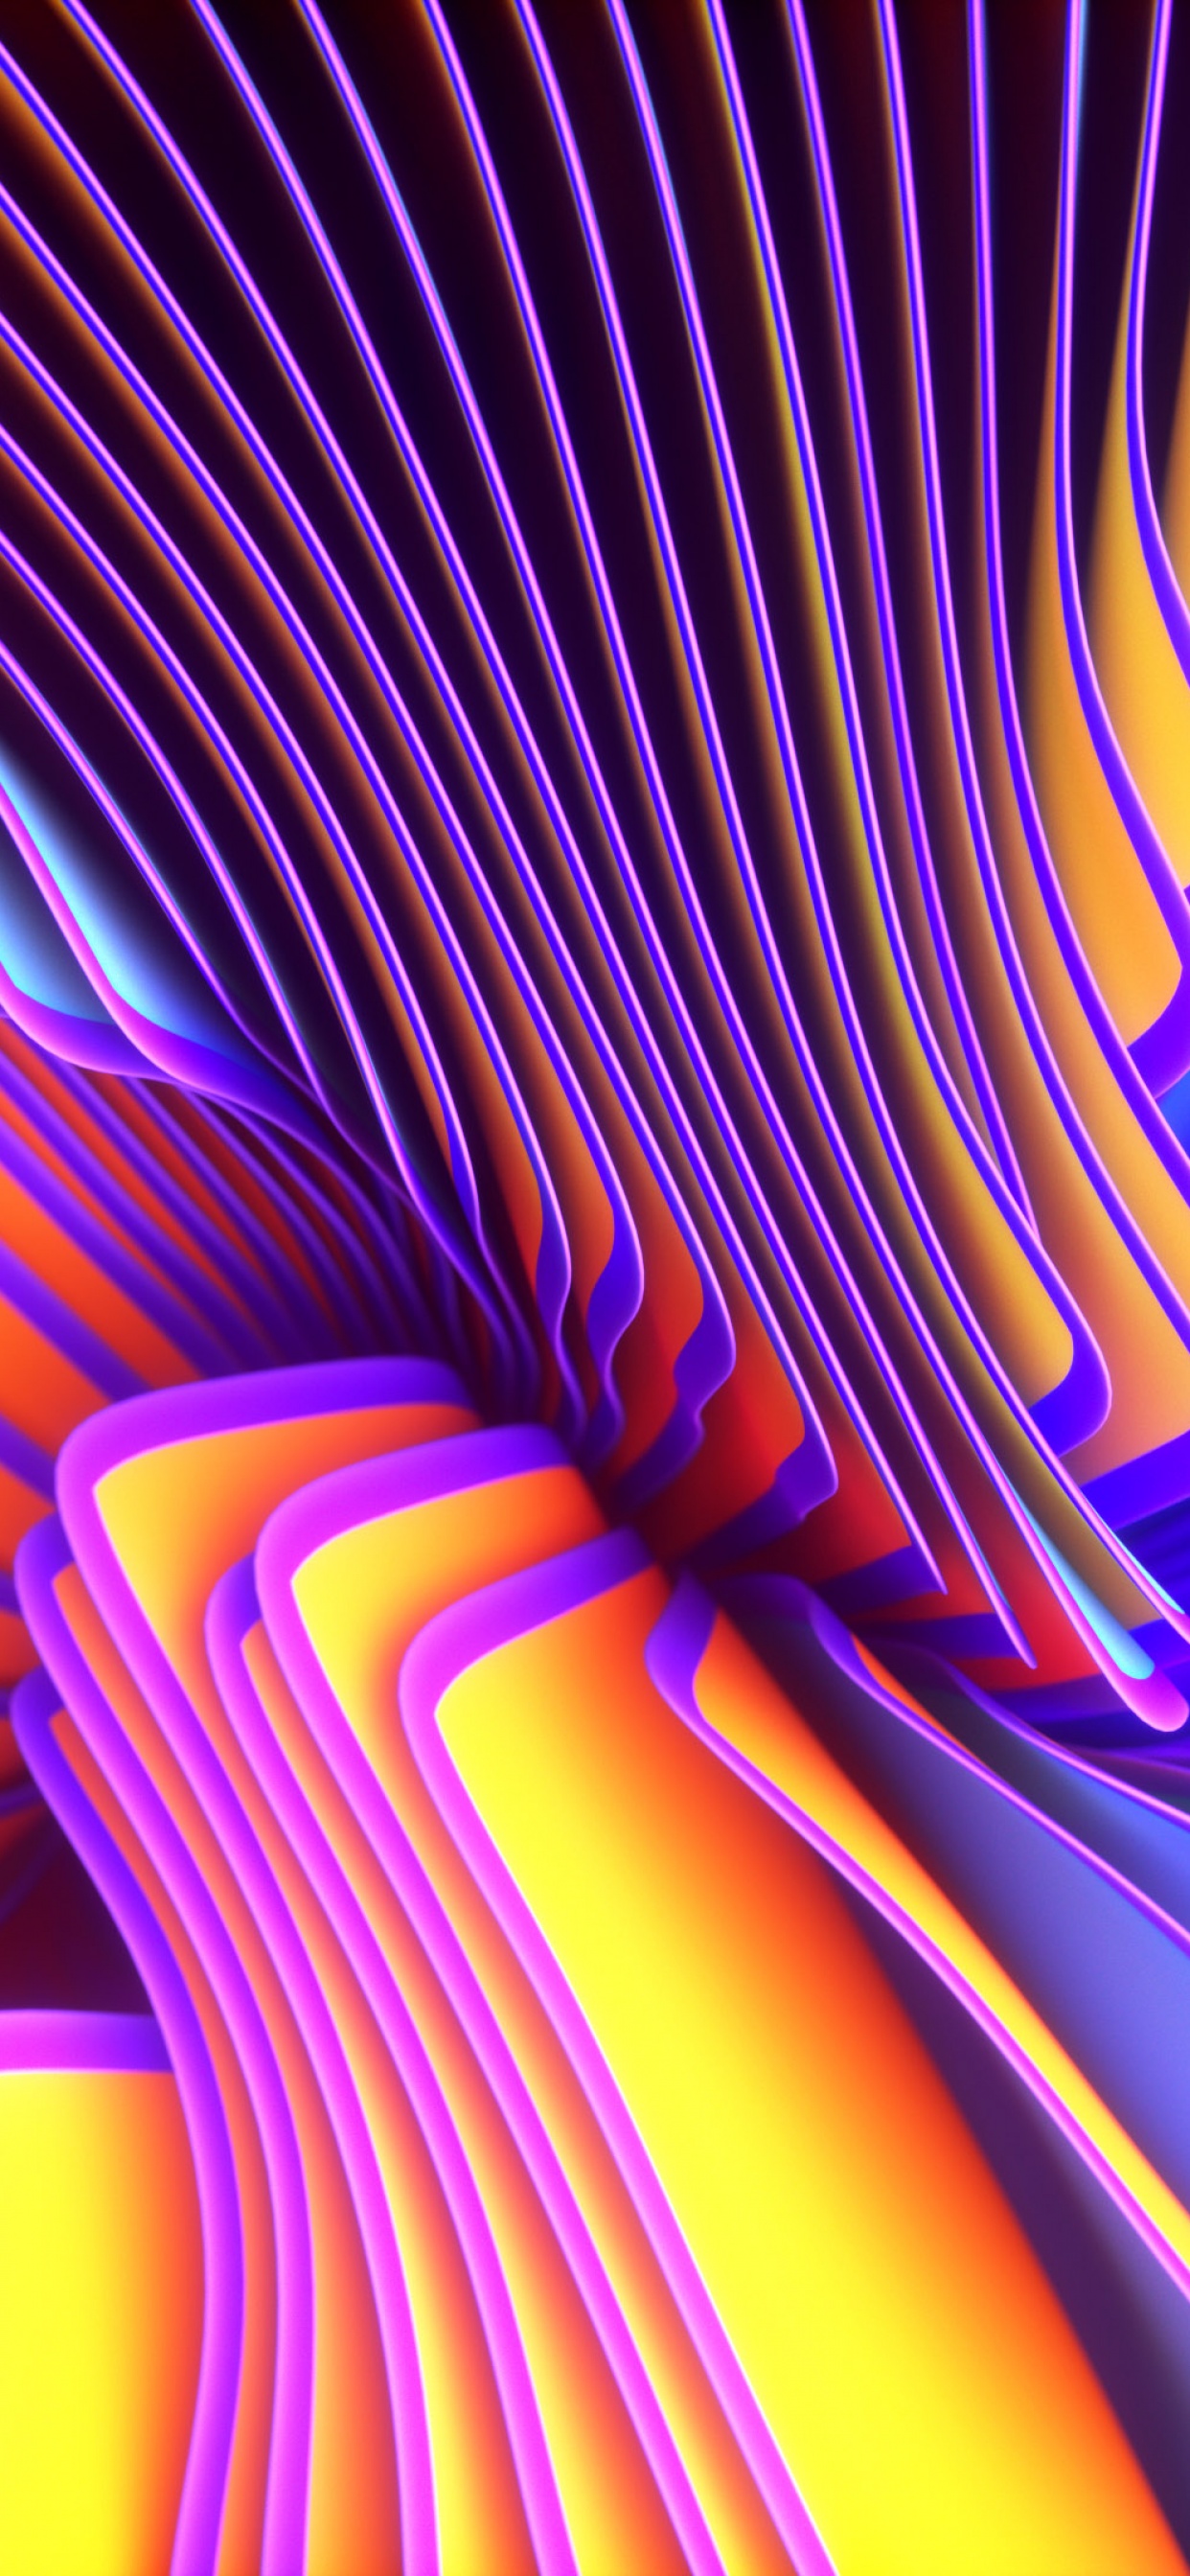 Twirls Wallpaper 4K, Colorful, Spectrum, Yellow, Violet, Abstract, #1638